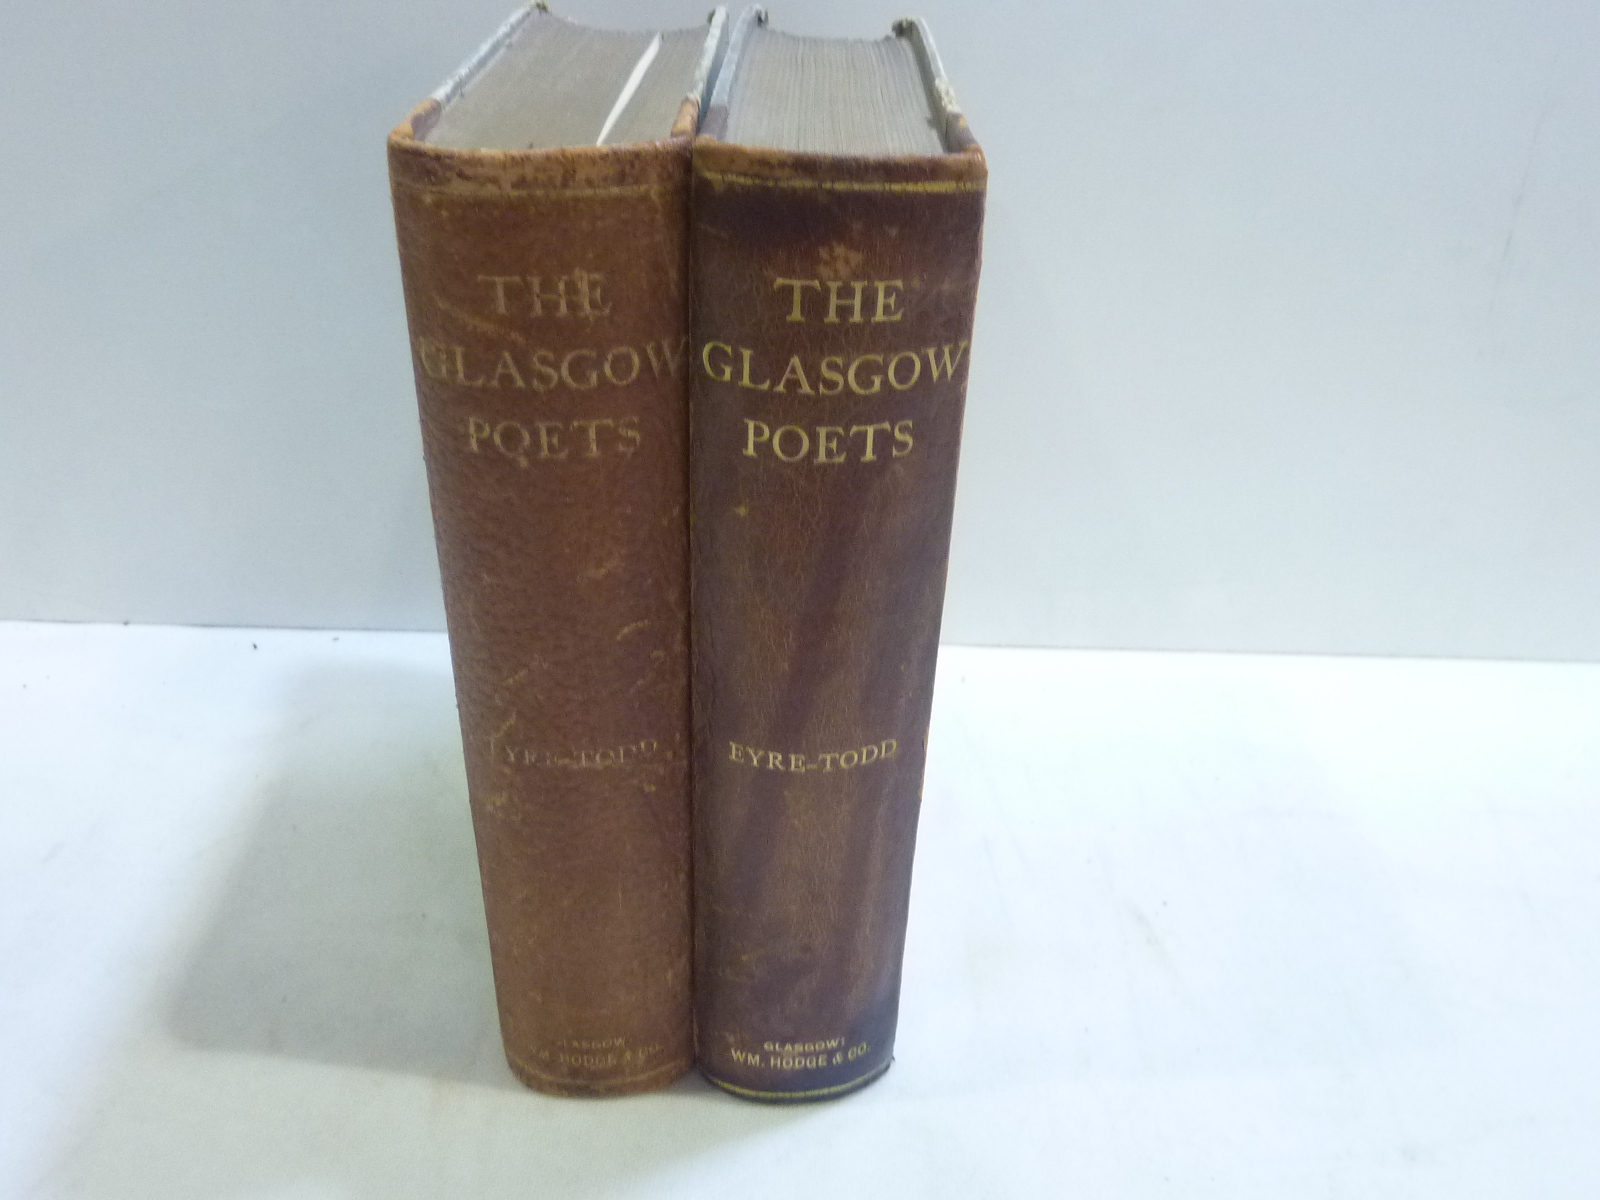 EYRE-TODD G. The Glasgow Poets. 2 copies. Ltd. ed. 175. Large paper. Qtr. morocco, rather worn.